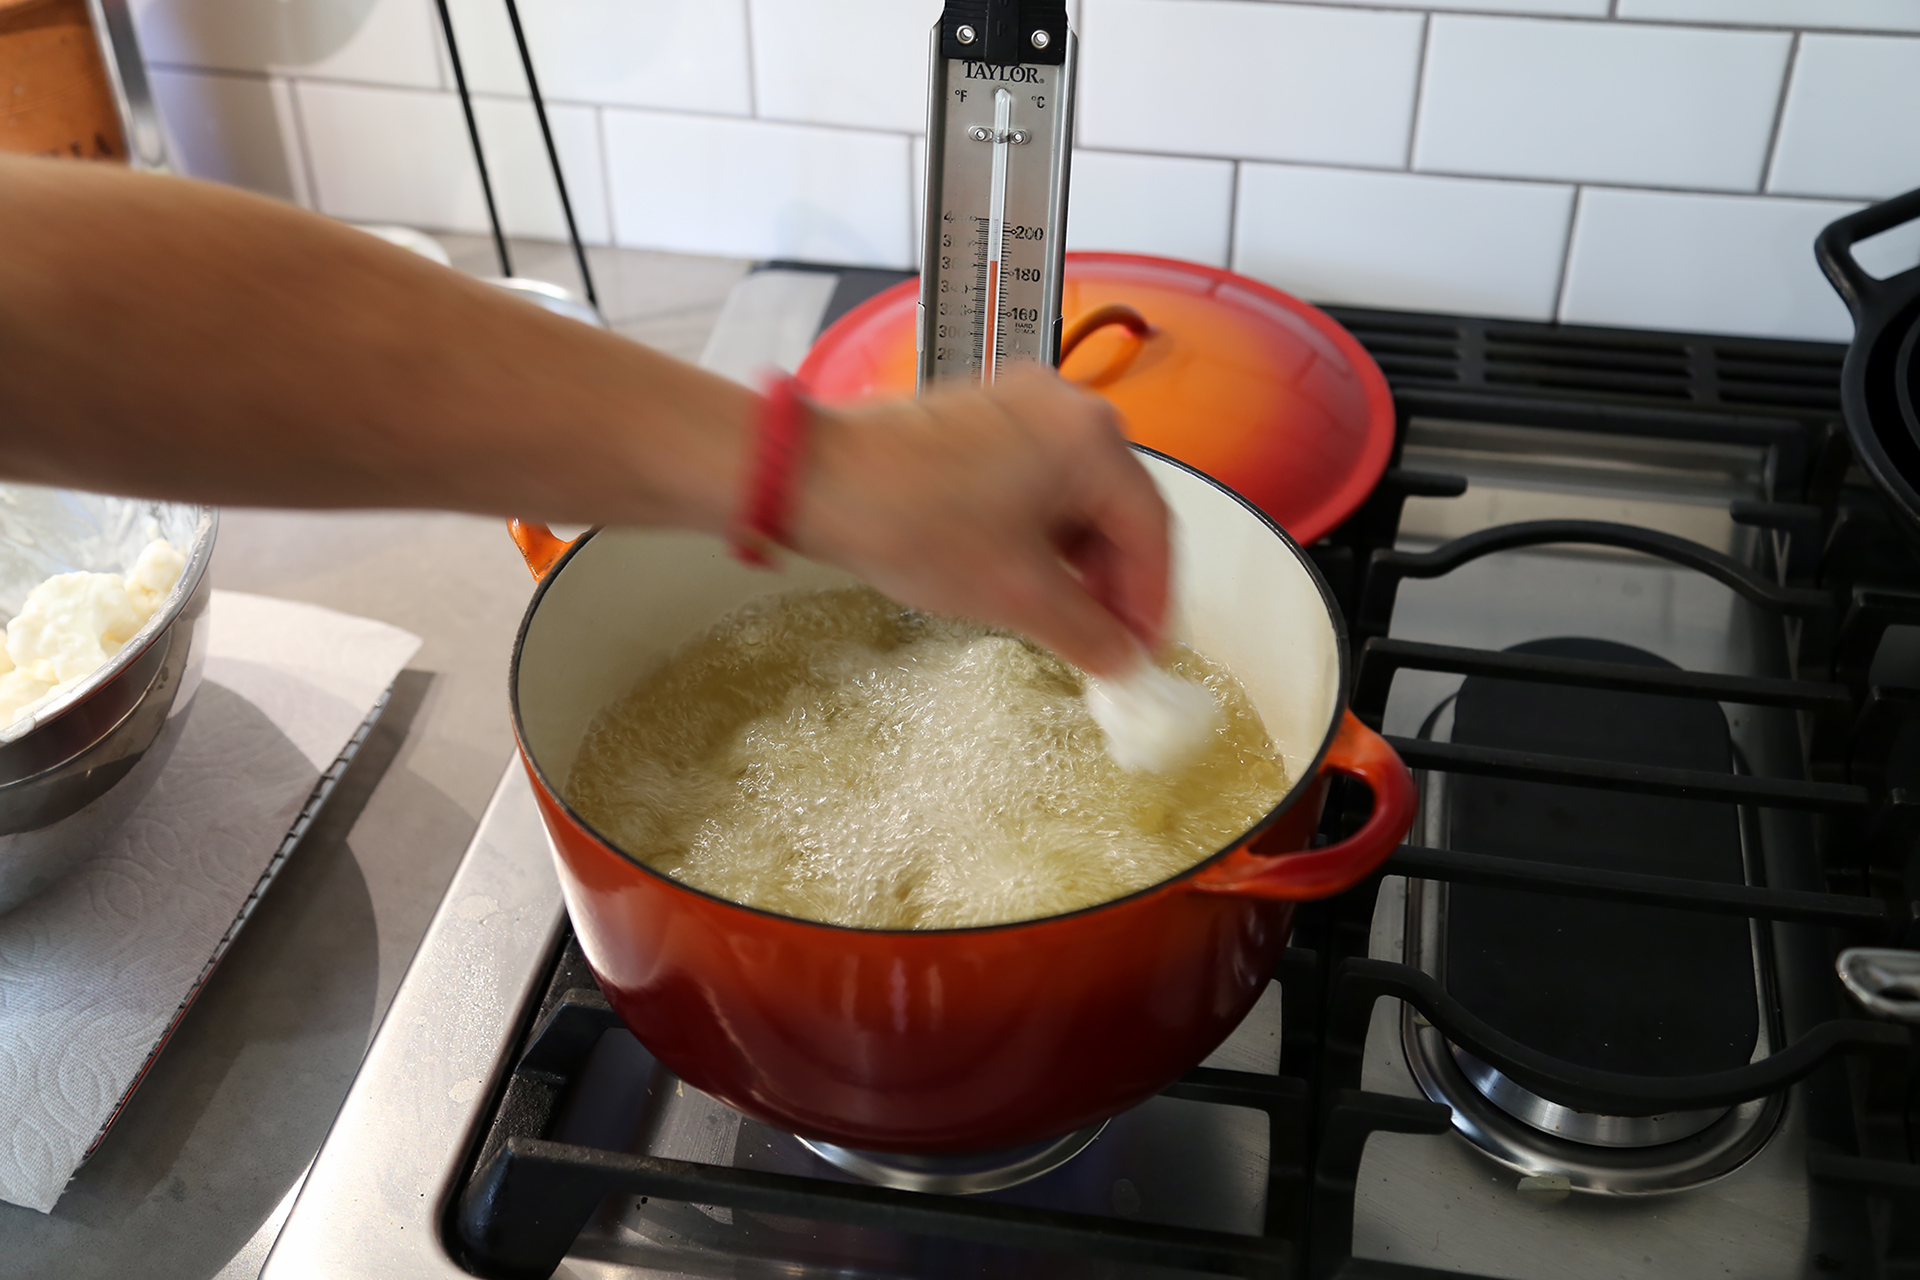 When the oil reaches 330F, pick up a floret, allowing any excess batter to drip off, and very carefully add it to the hot oil.